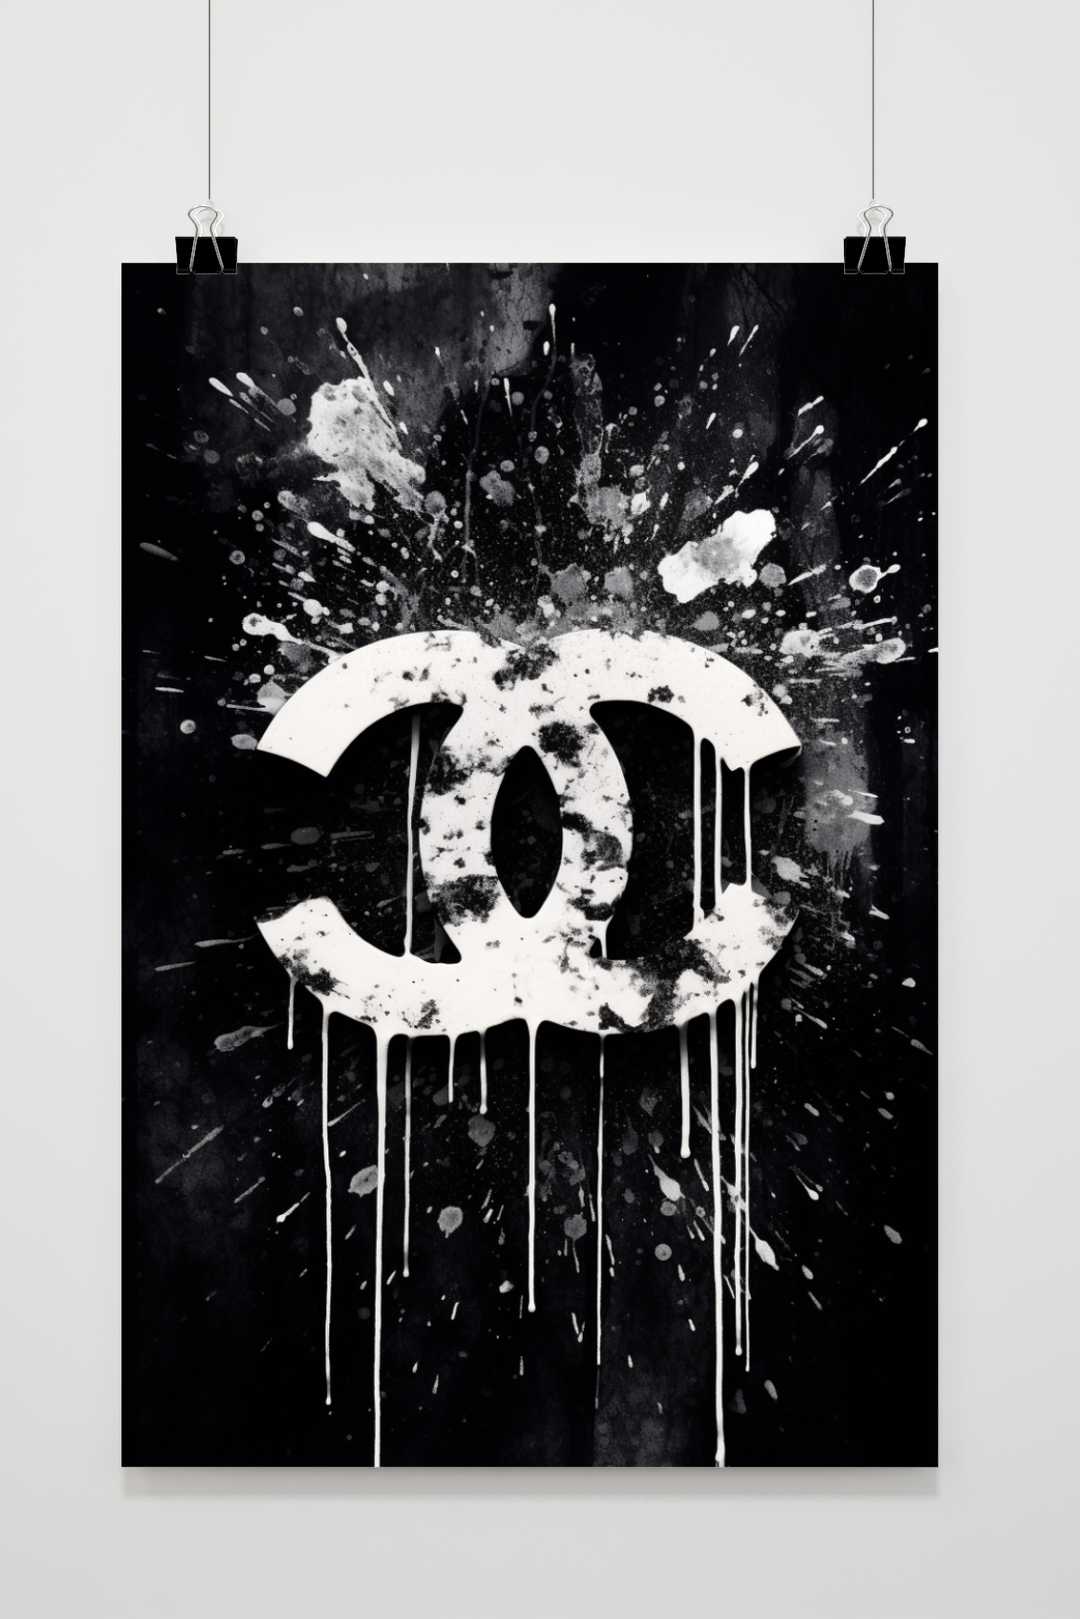 Chanel poster, Chanel wall art, Coco chanel poster